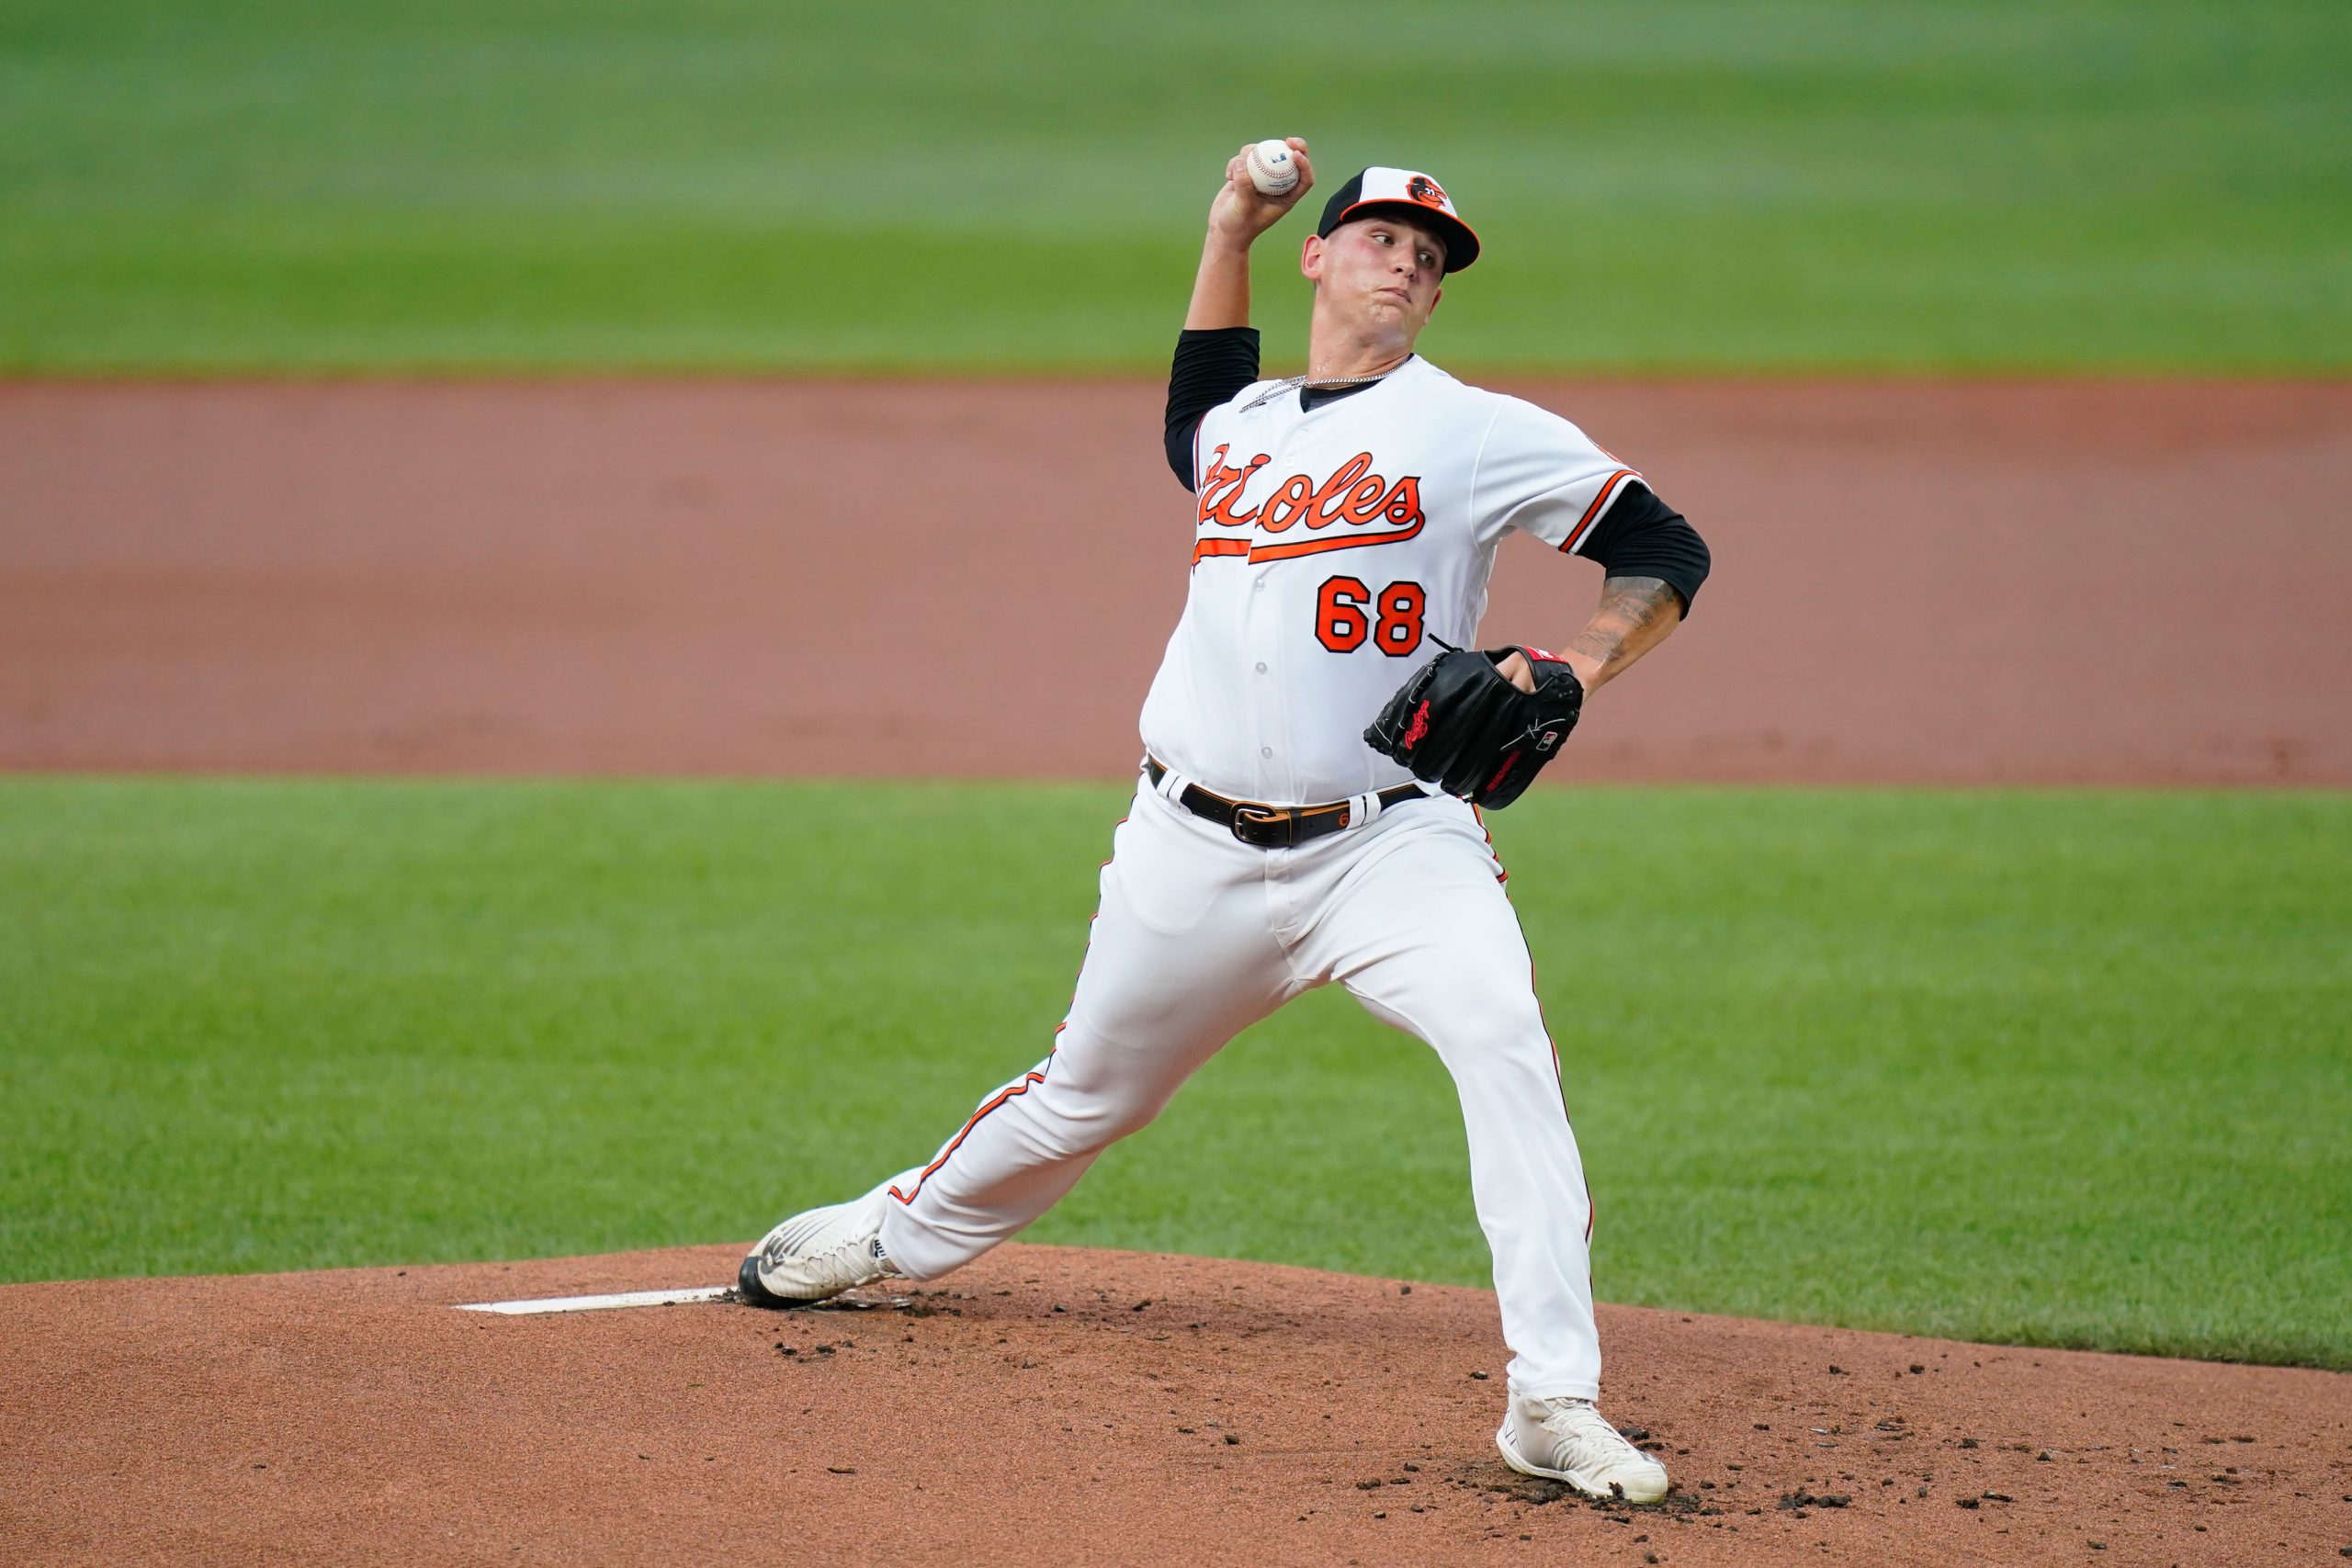 John Means should be back in the Orioles rotation soon. The timing is  perfect. - Camden Chat